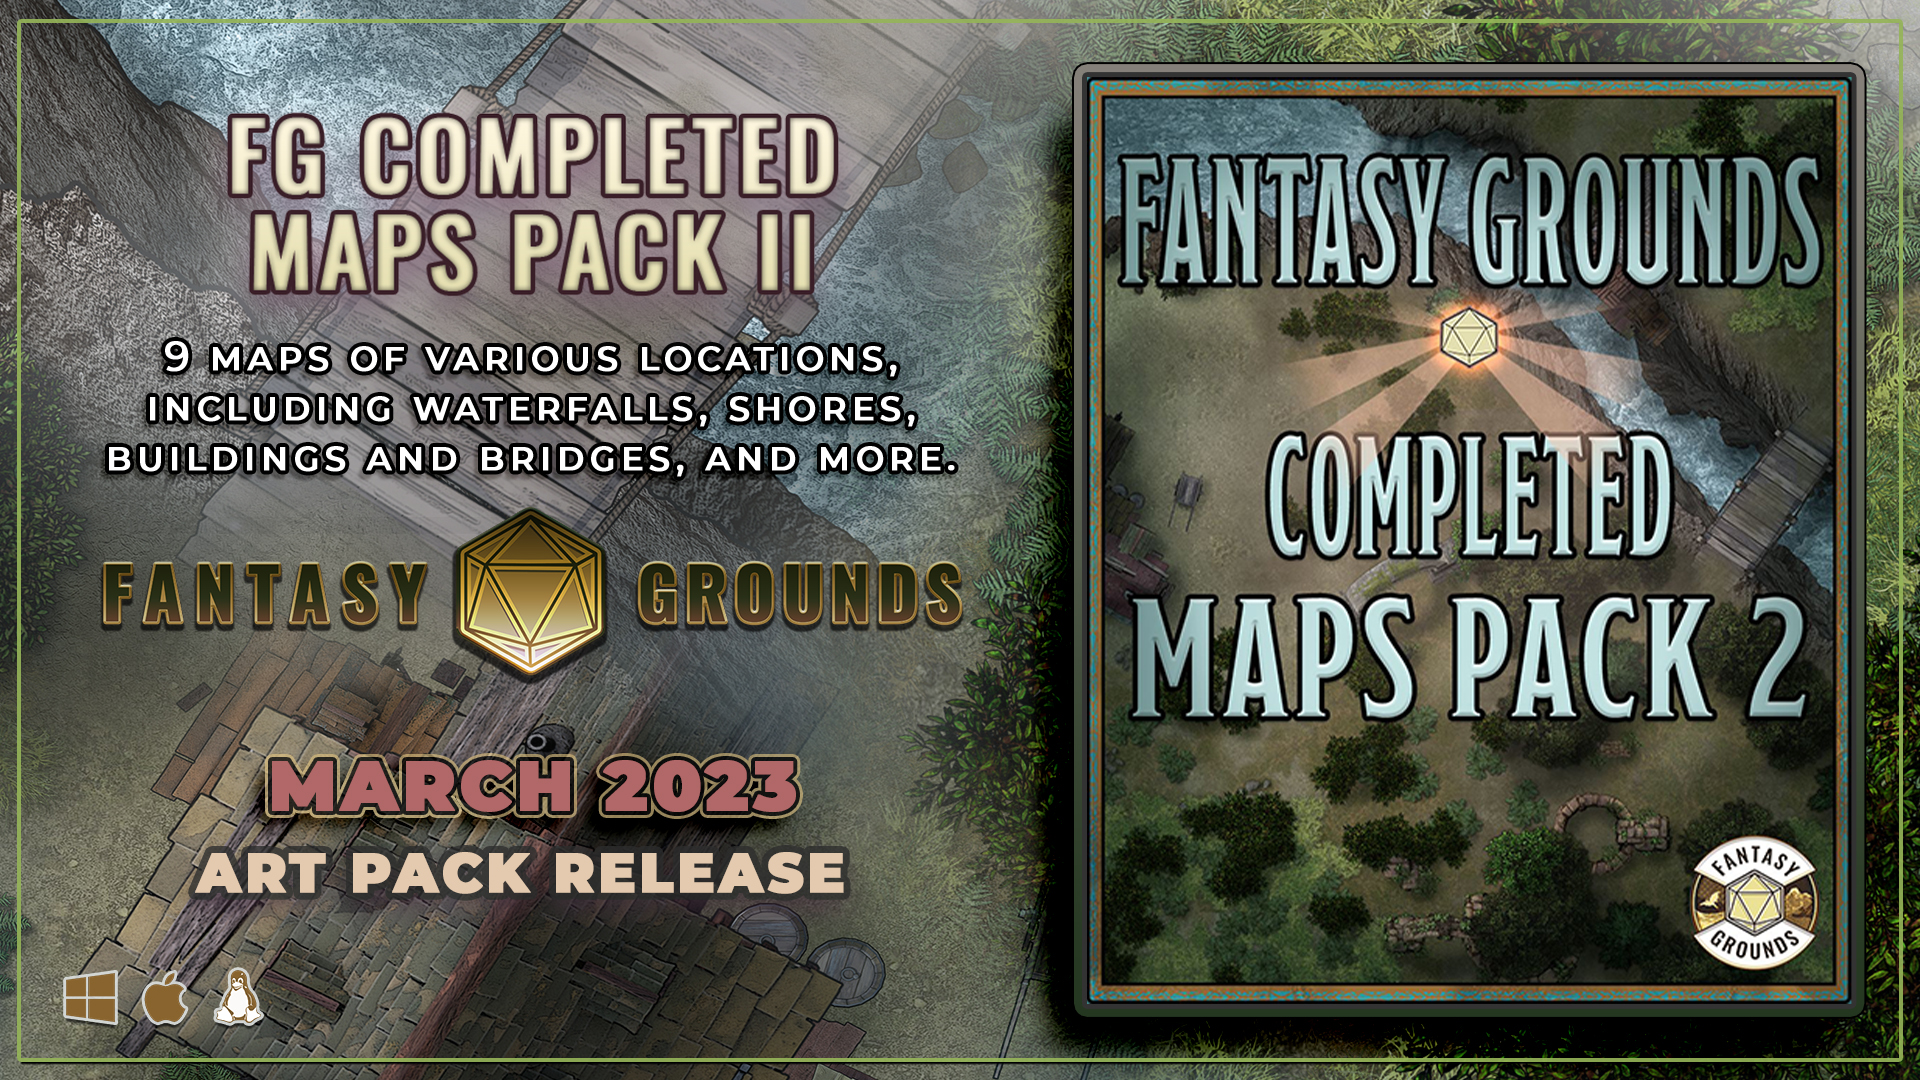 FG Completed Maps Pack 2(SWKARTPACKMAPS2).jpg